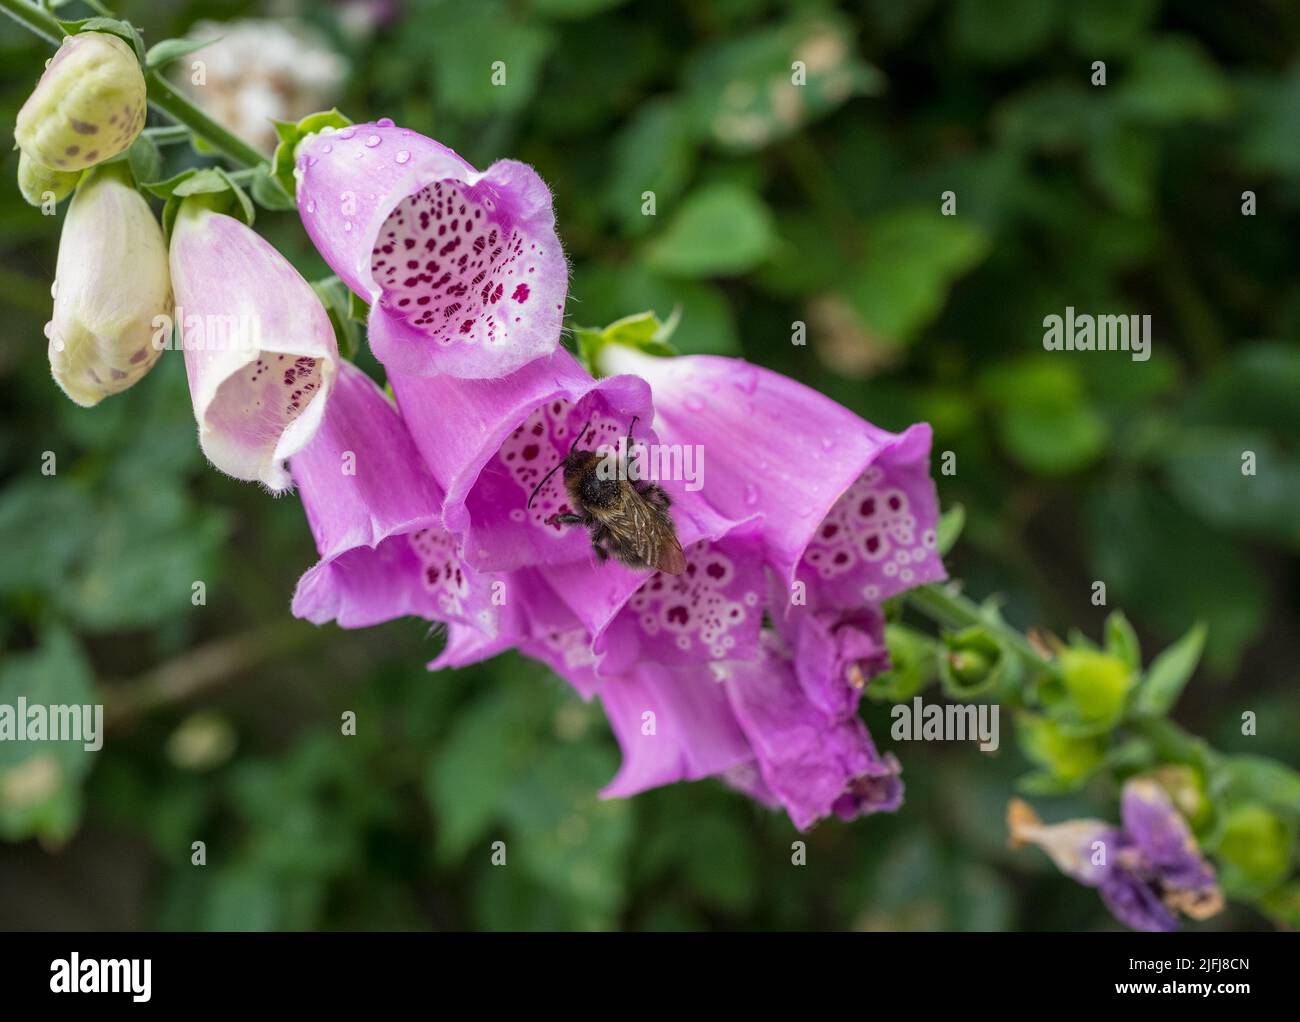 Bumble Bee collecting nectar and pollinating a Foxglove wildflower. Stock Photo